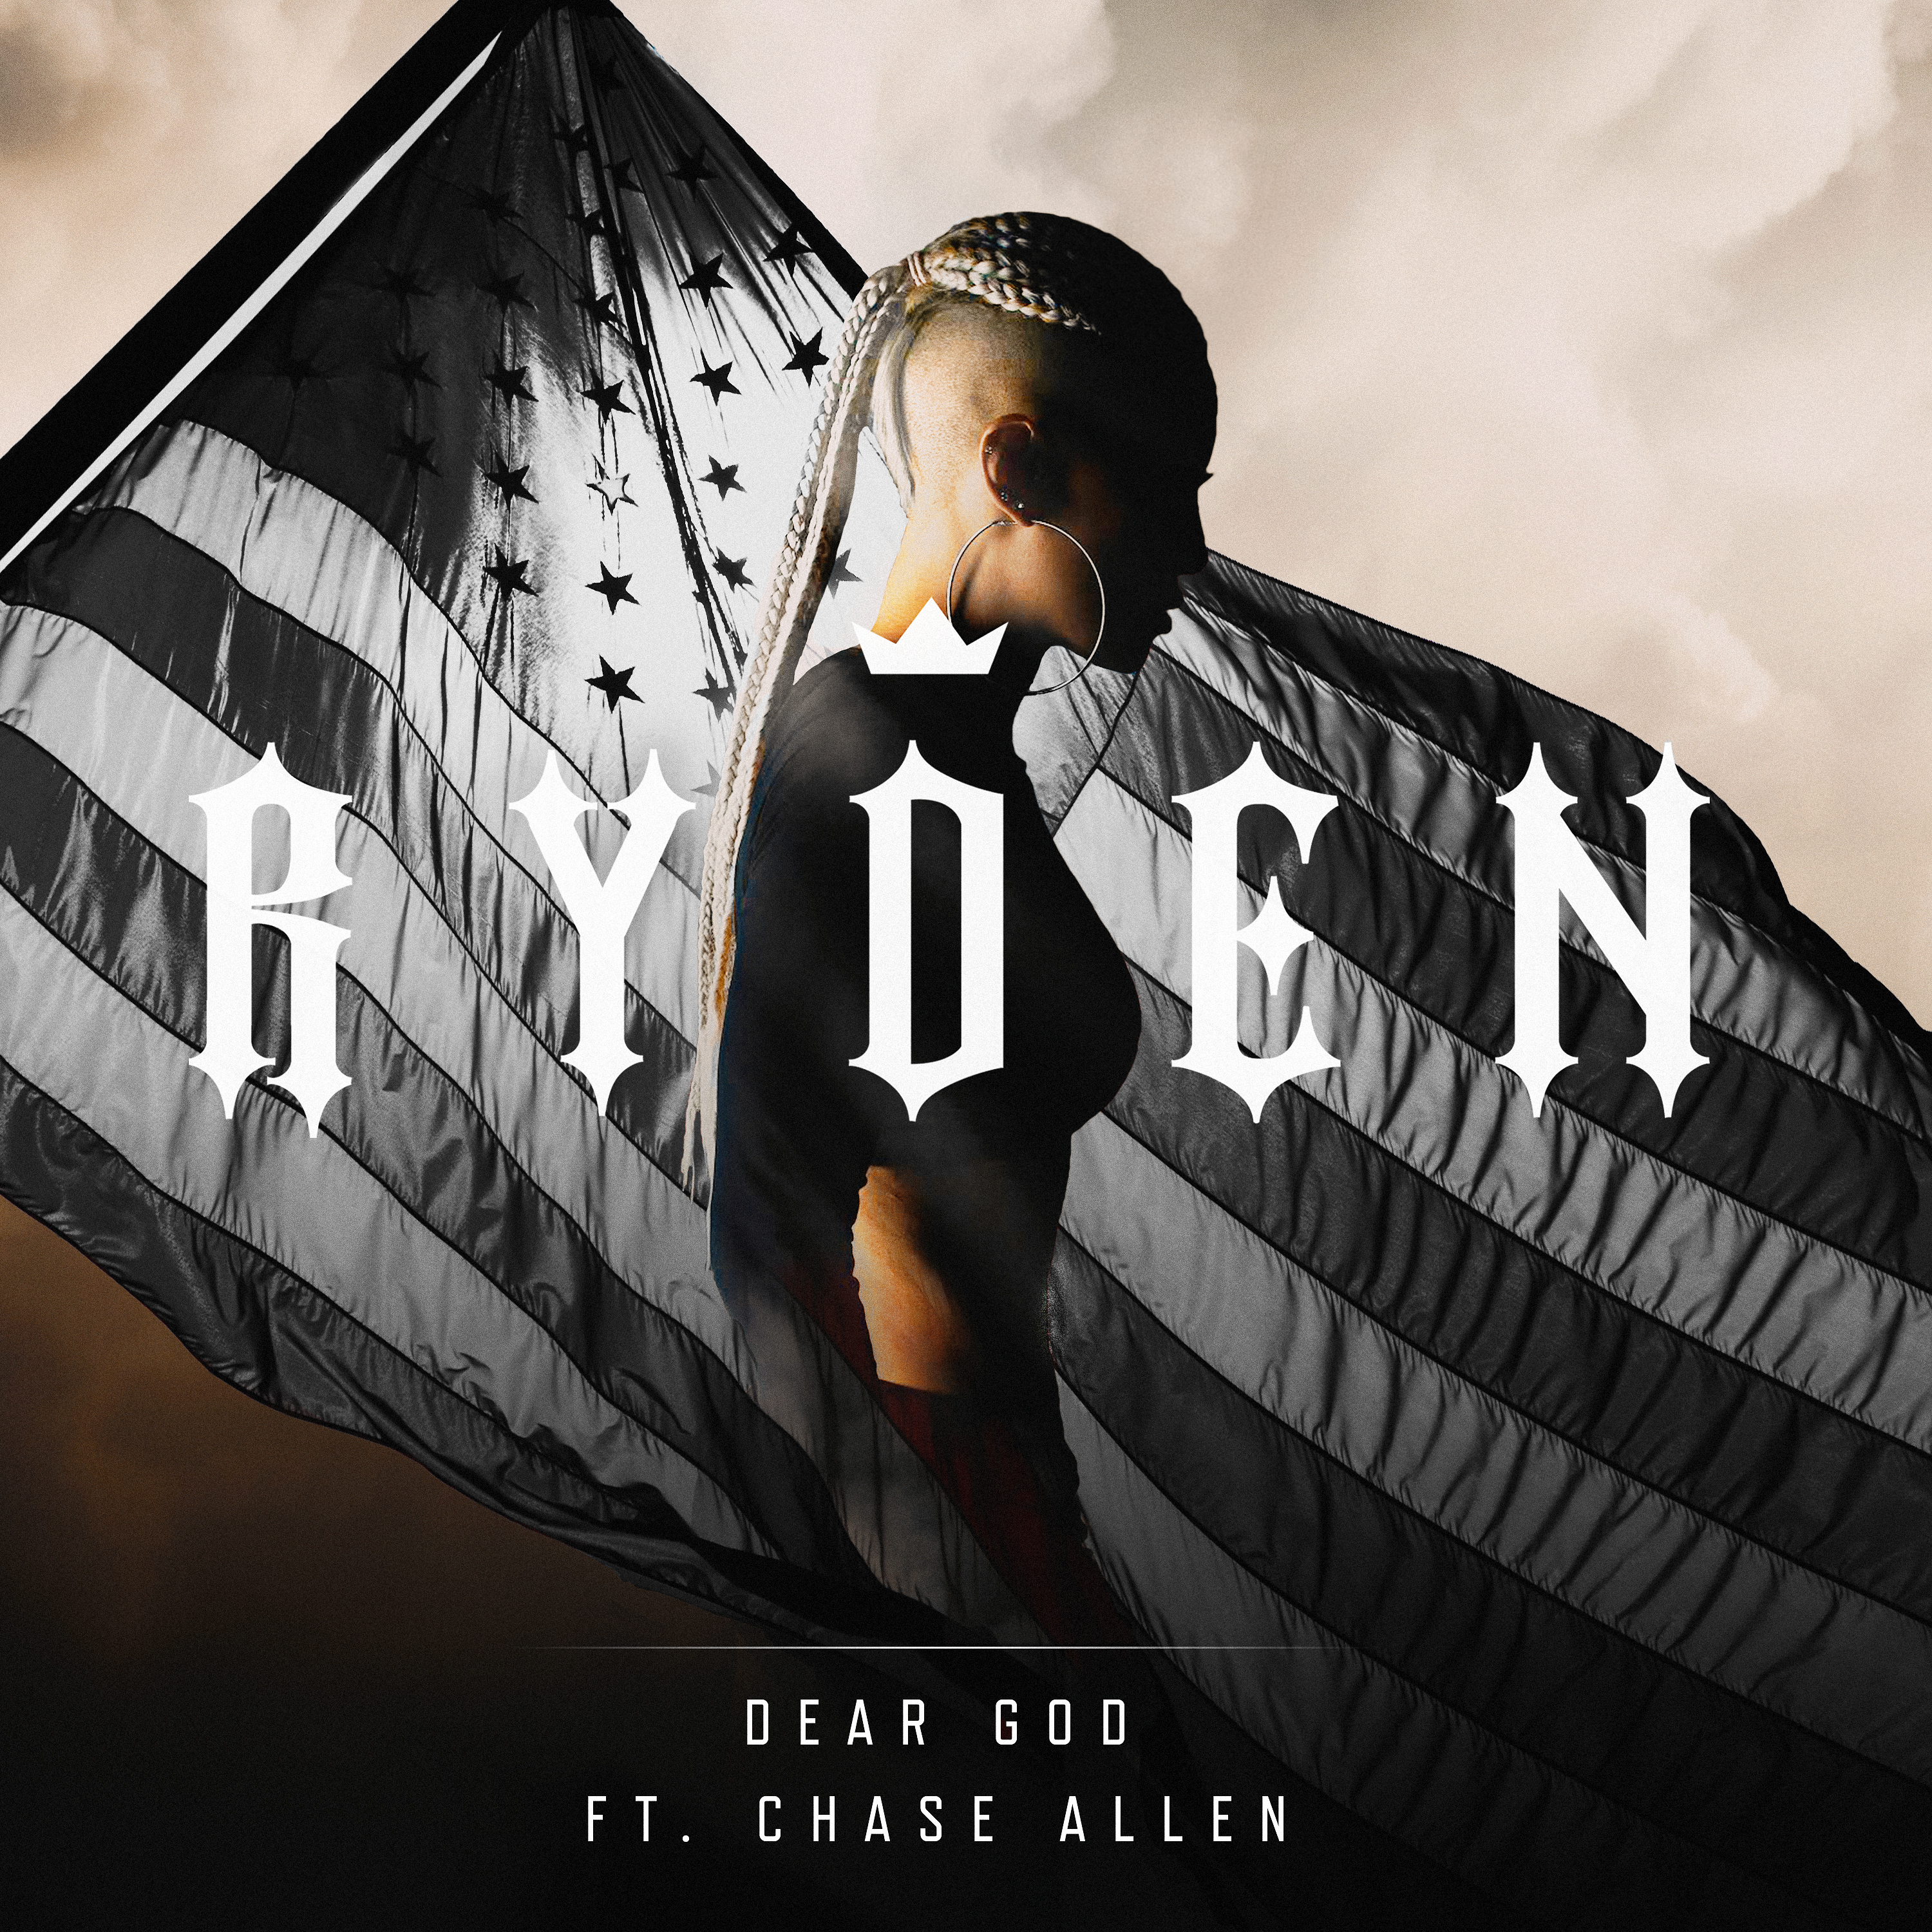 RYDEN & Chase Allen “Dear God” Is A Call For Help Where America Needs It